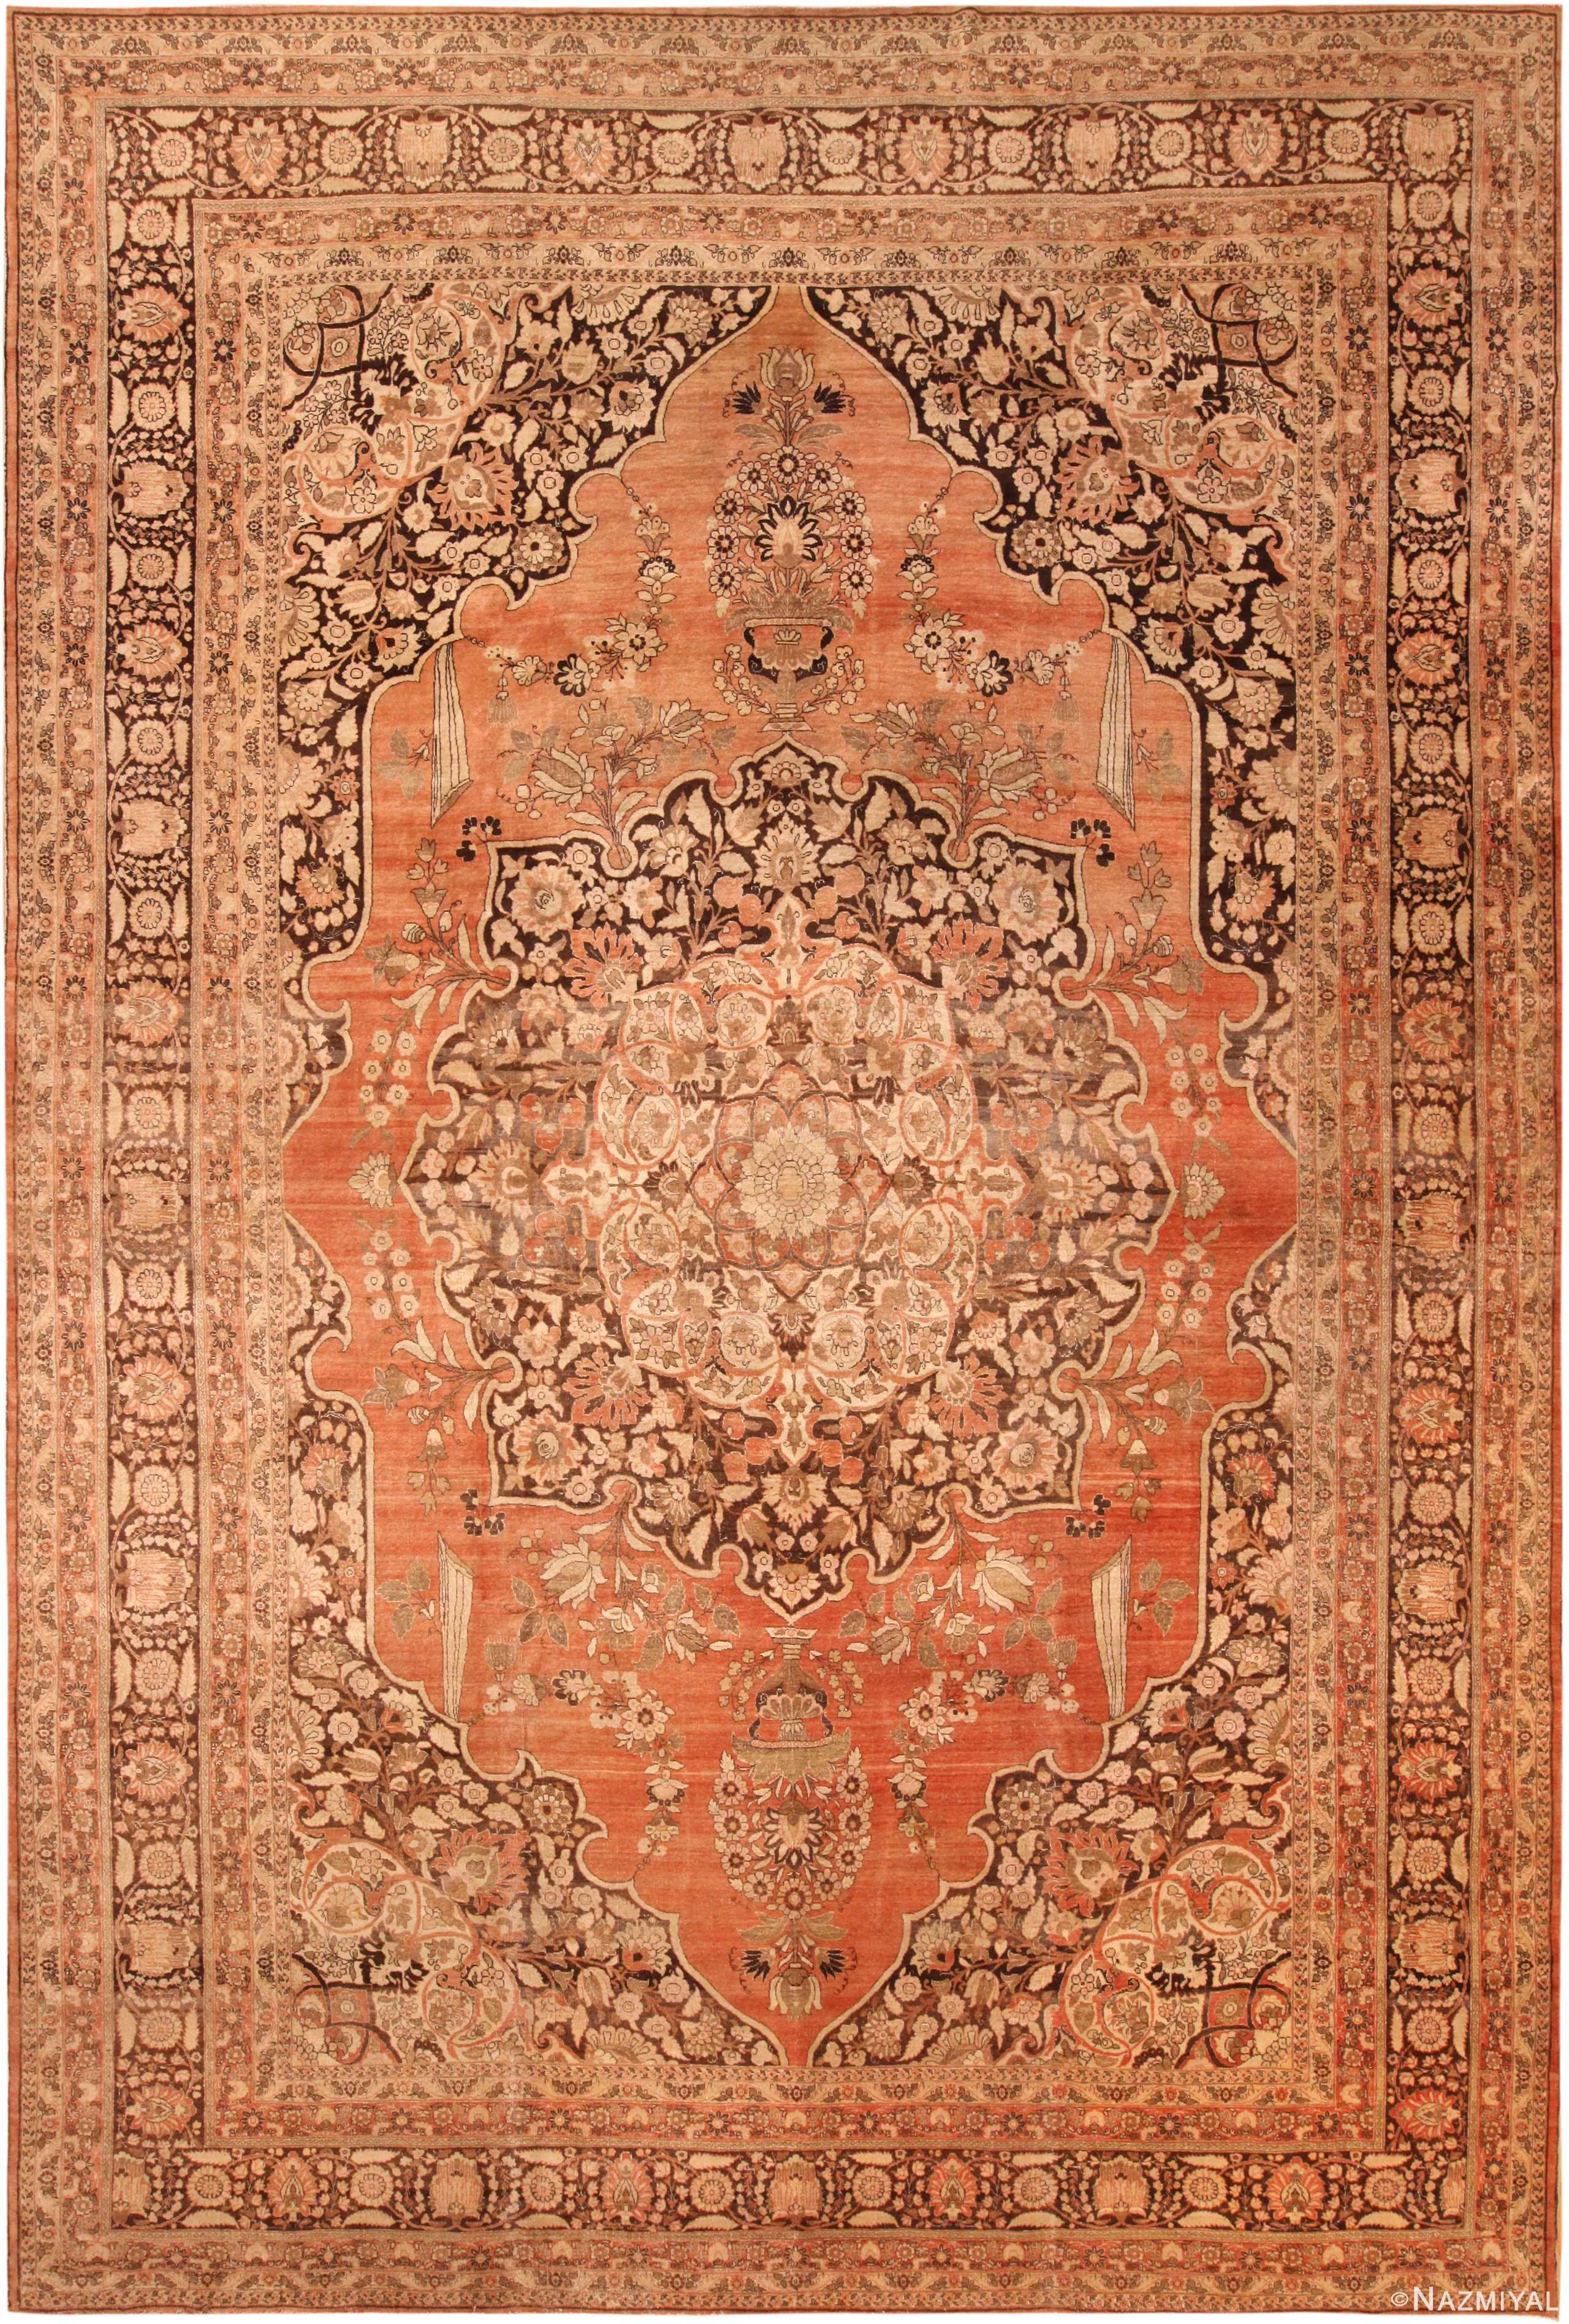 Large Antique Persian Tabriz Area Rug 71721 by Nazmiyal Antique Rugs